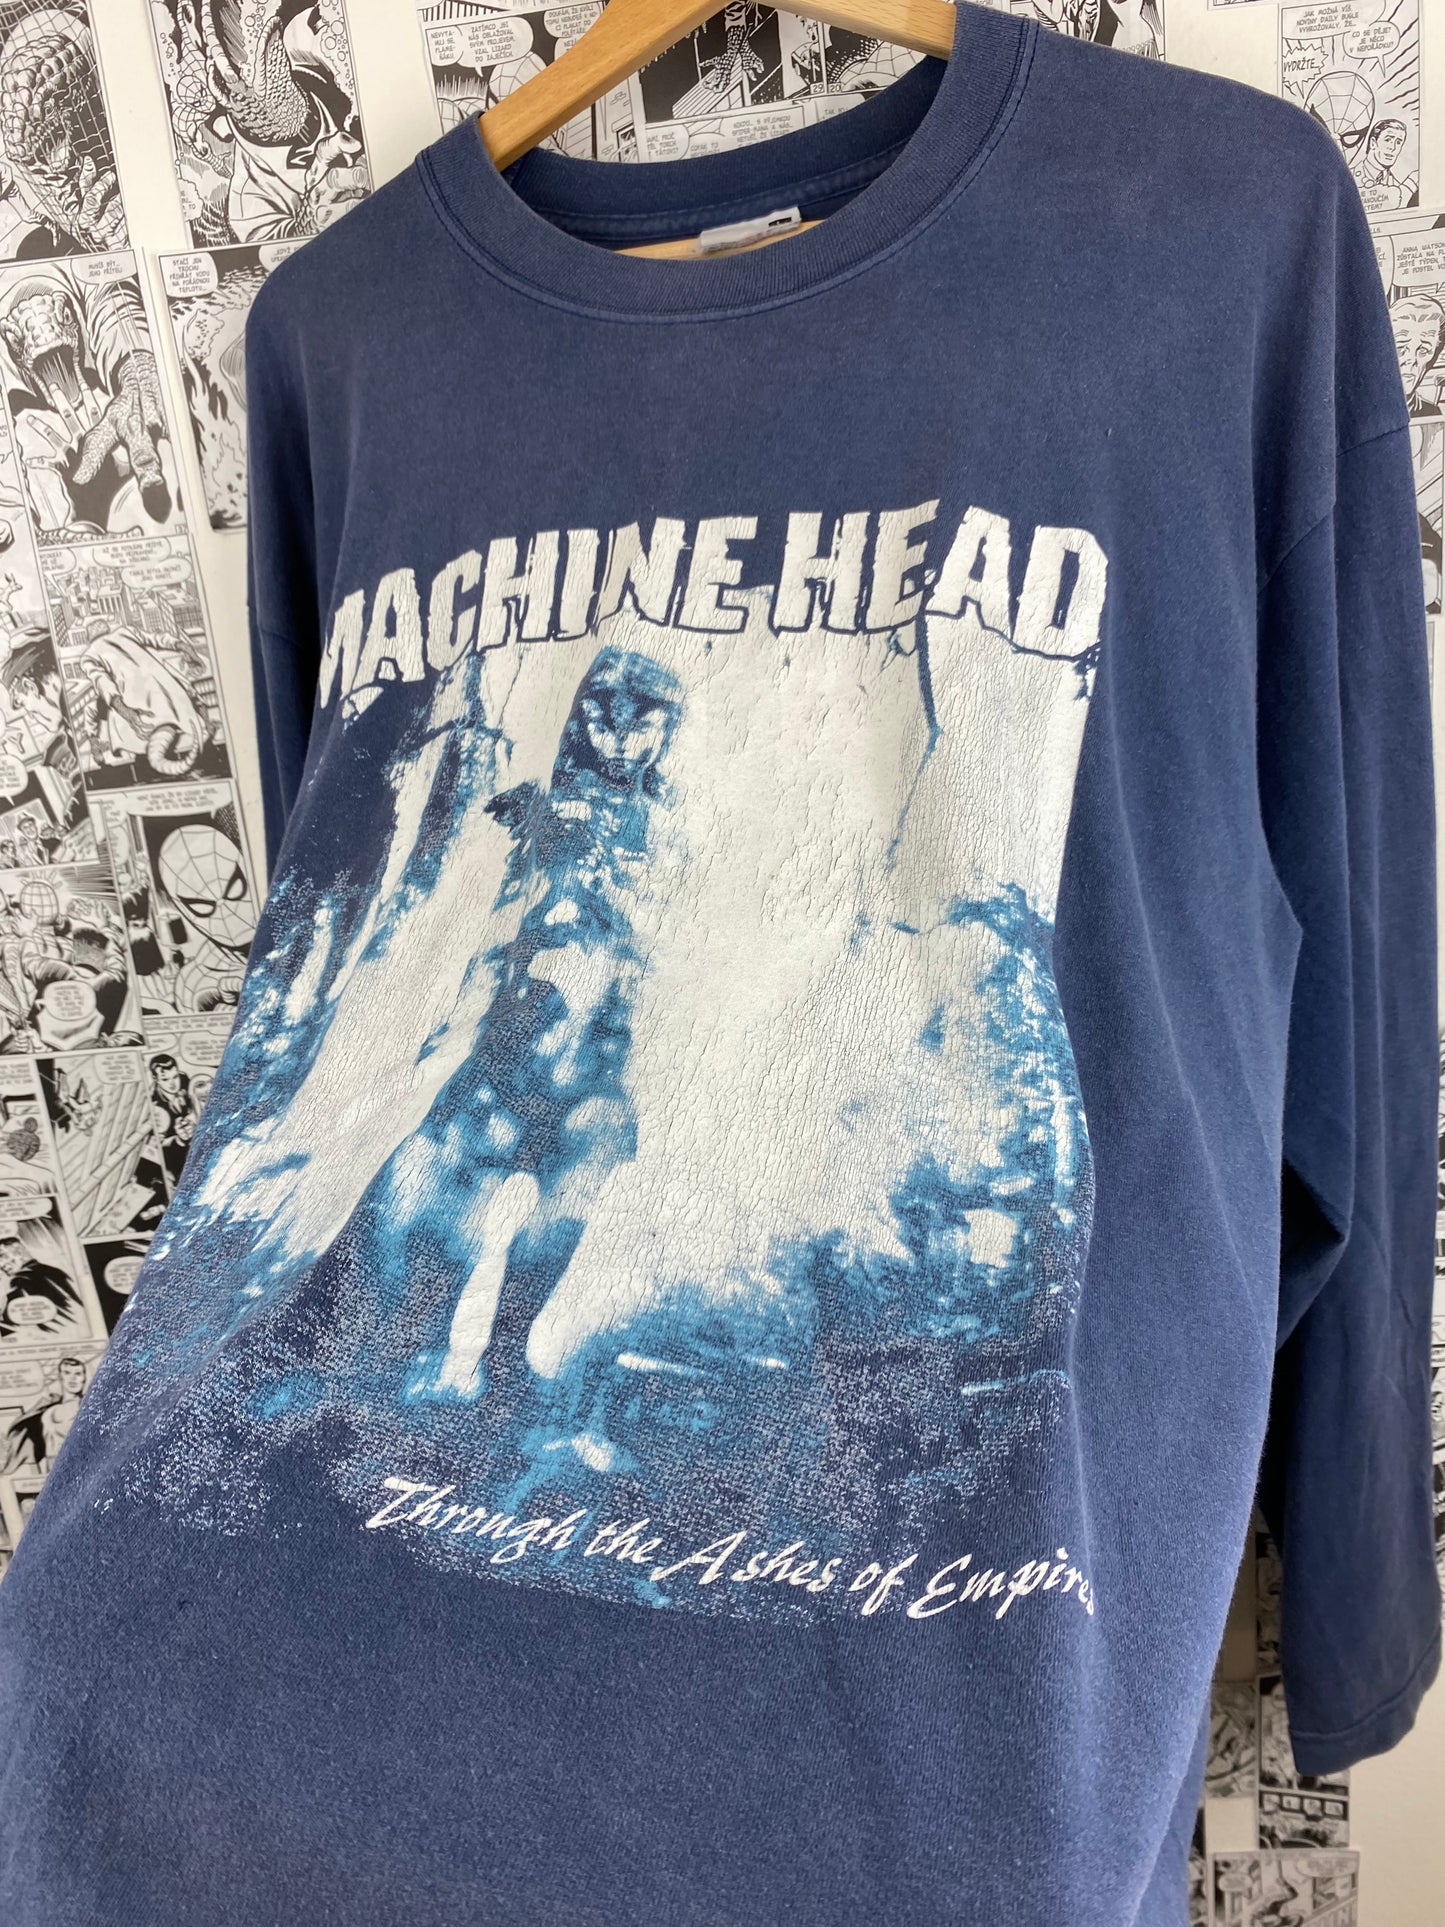 Vintage Machine Head “ Throught the Ashes of Empires” t-shirt - size L